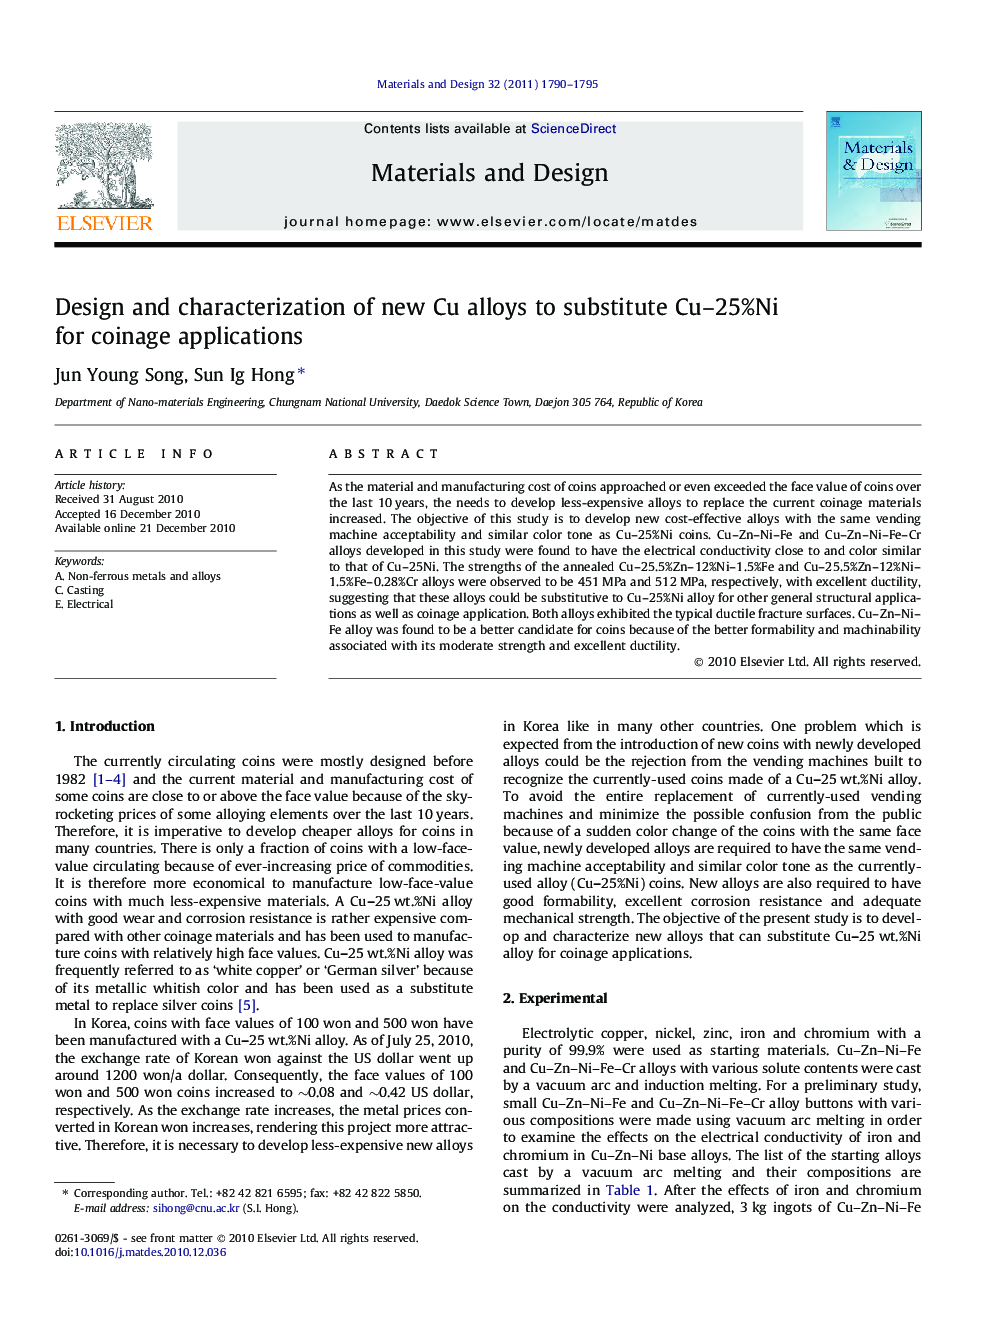 Design and characterization of new Cu alloys to substitute Cu-25%Ni for coinage applications